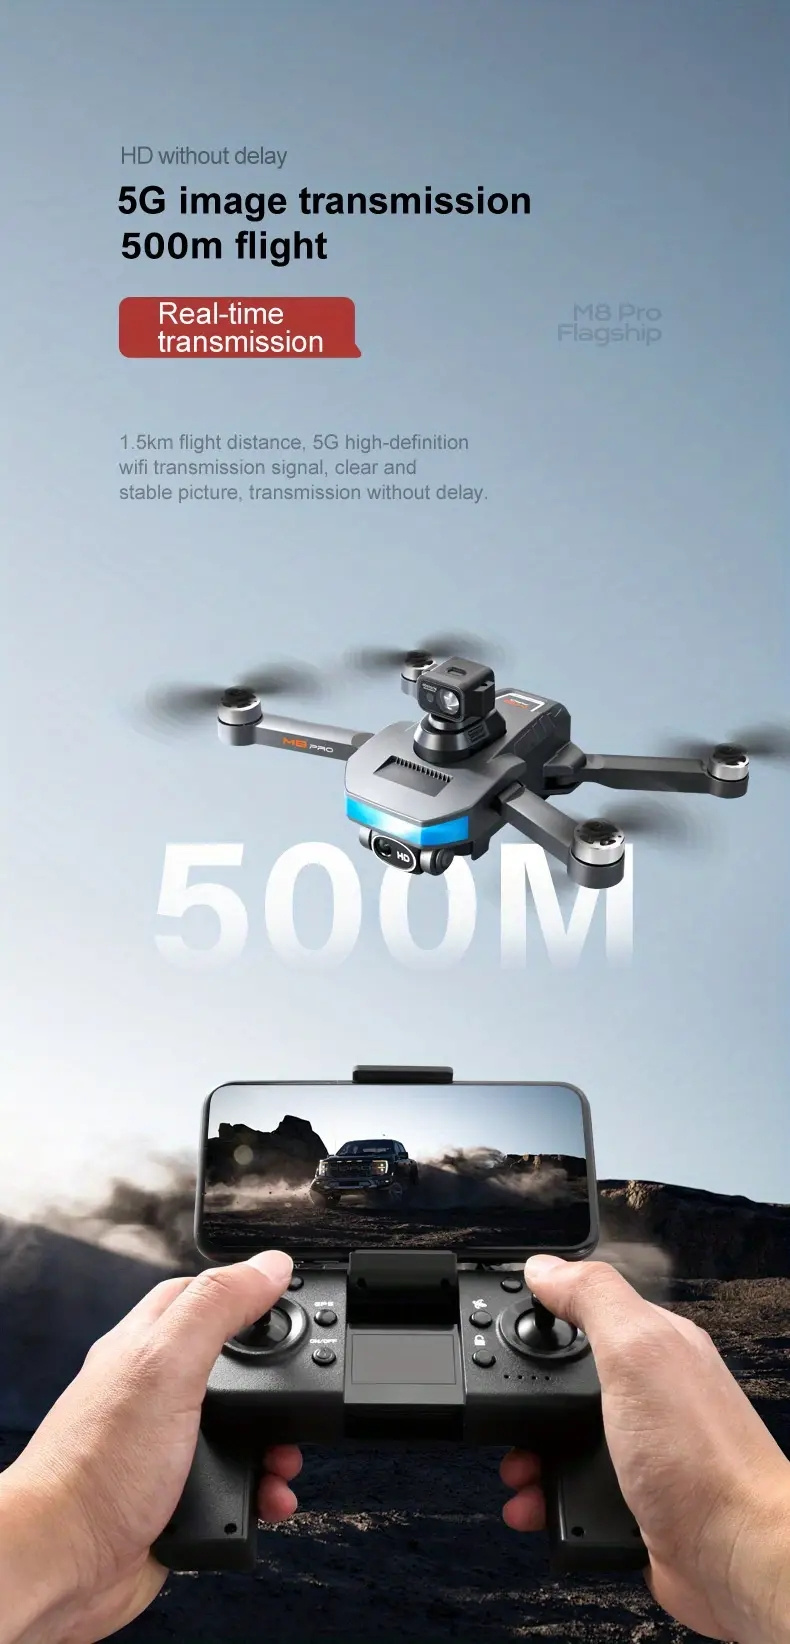 m8 pro gps brushless optical flow laser obstacle avoidance drone christmas childrens gift assembly flying model toy details 7